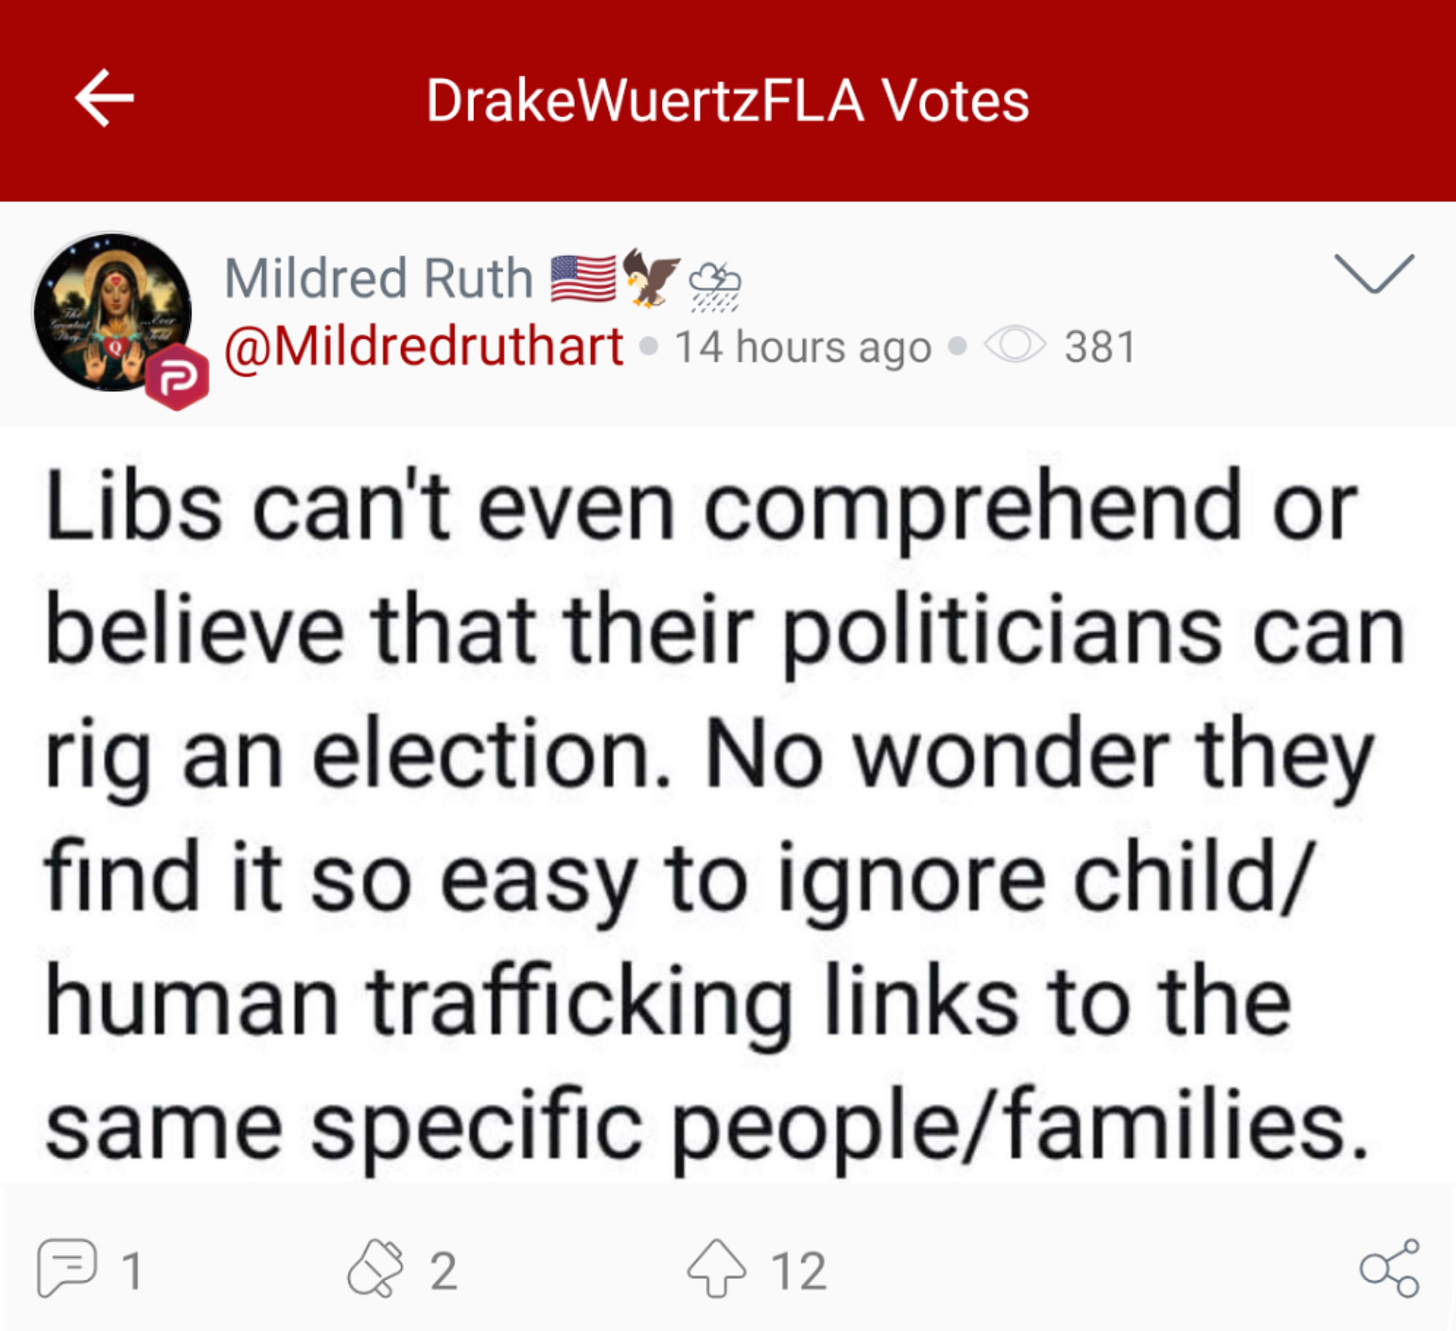 @DrakeWuertzFLA “votes” a Parler post attempting to connect baseless election fraud conspiracy theories with baseless “liberal pedophile” conspiracy theories. (Image: Parler screenshot.)